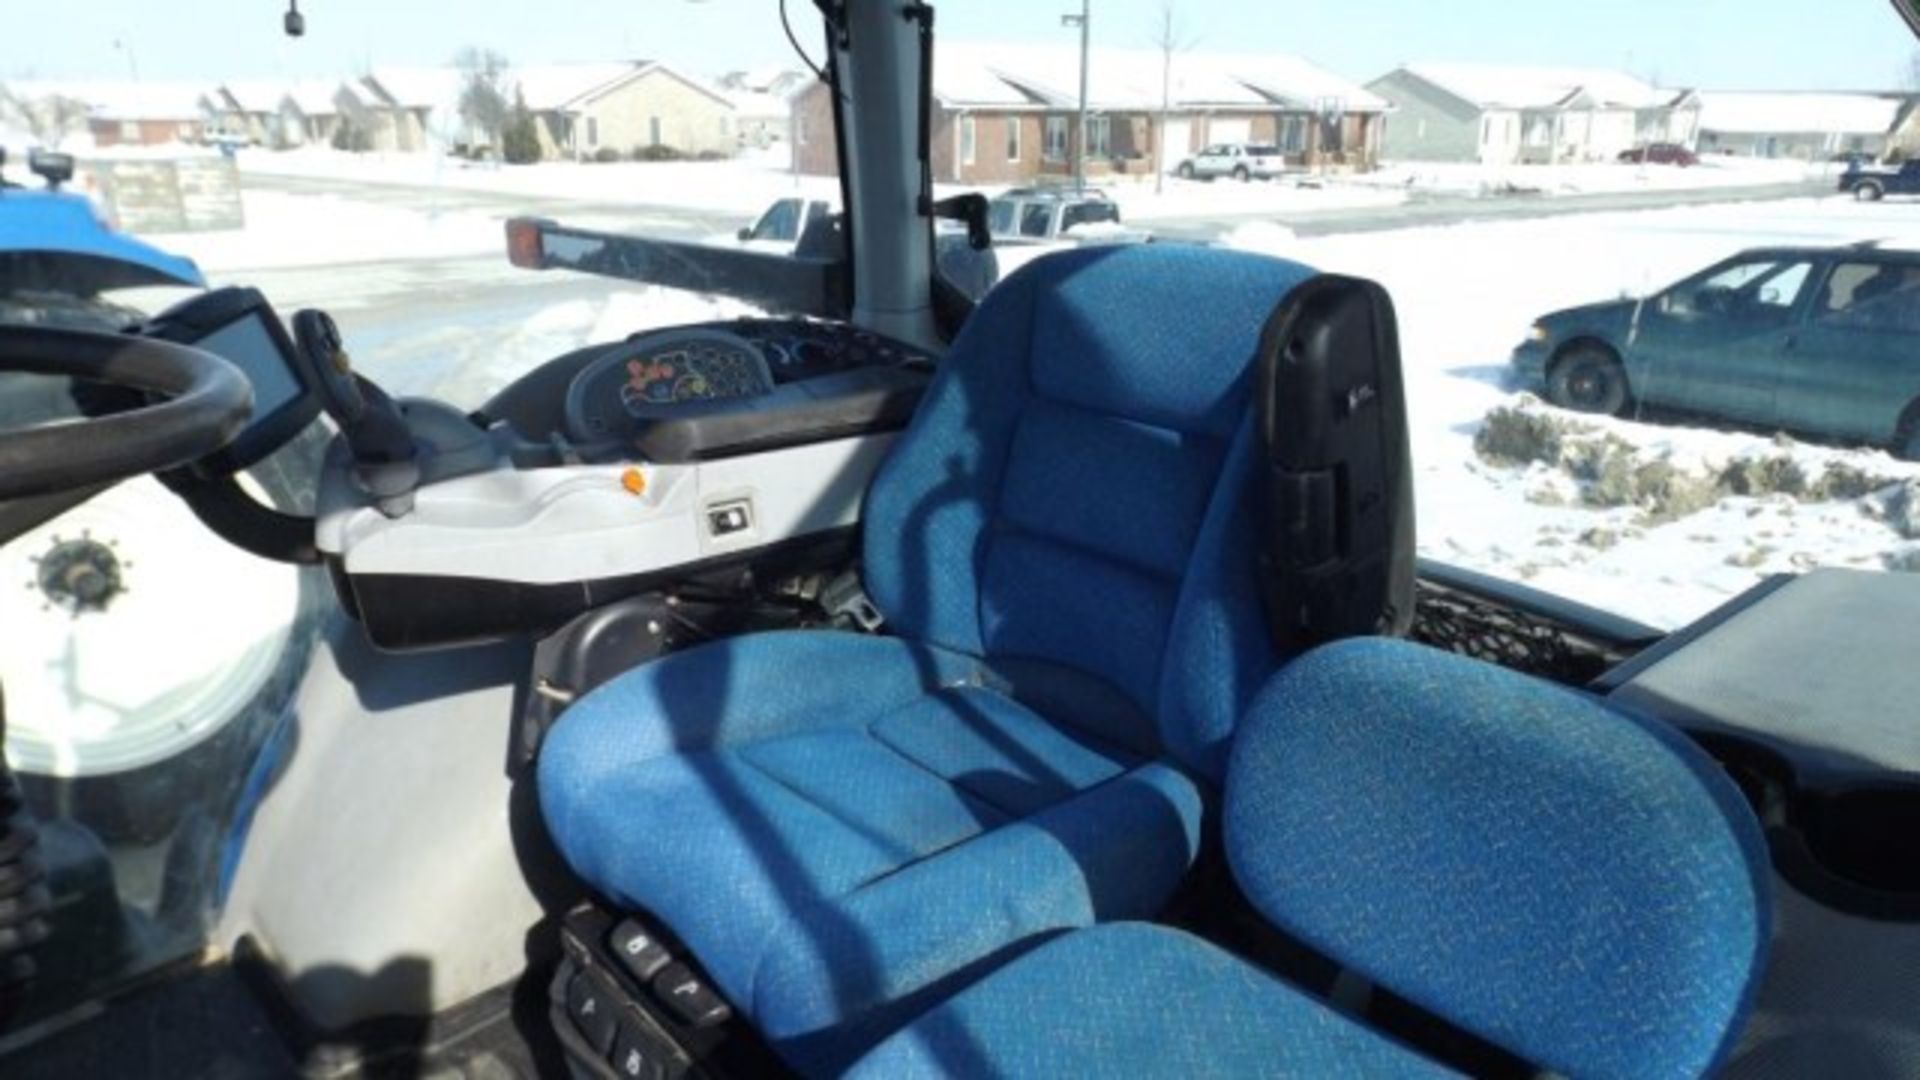 New Holland T8.275 Tractor '12, sn#ZCRC03823 2101 Hrs, MFWD, Deluxe Cab, Buddy Seat, 235 HP, 18/4 - Image 14 of 18